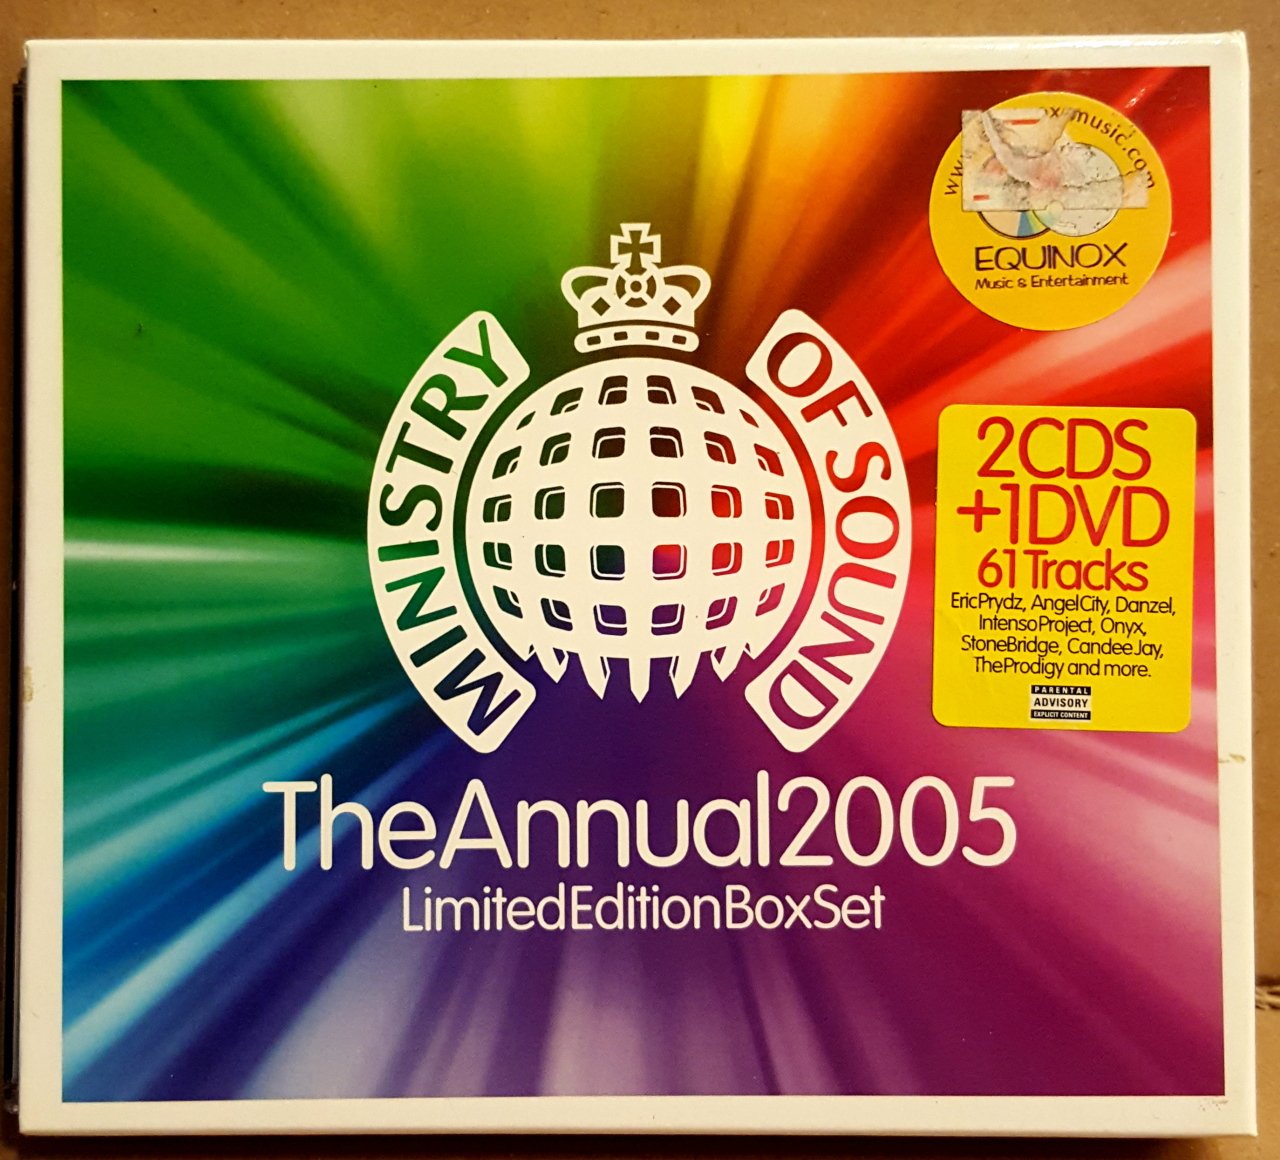 MINISTRY OF SOUND ANNUAL 2005 - VARIOUS ARTISTS - 2CD 1DVD BOX HOUSE TECHNO 2.EL